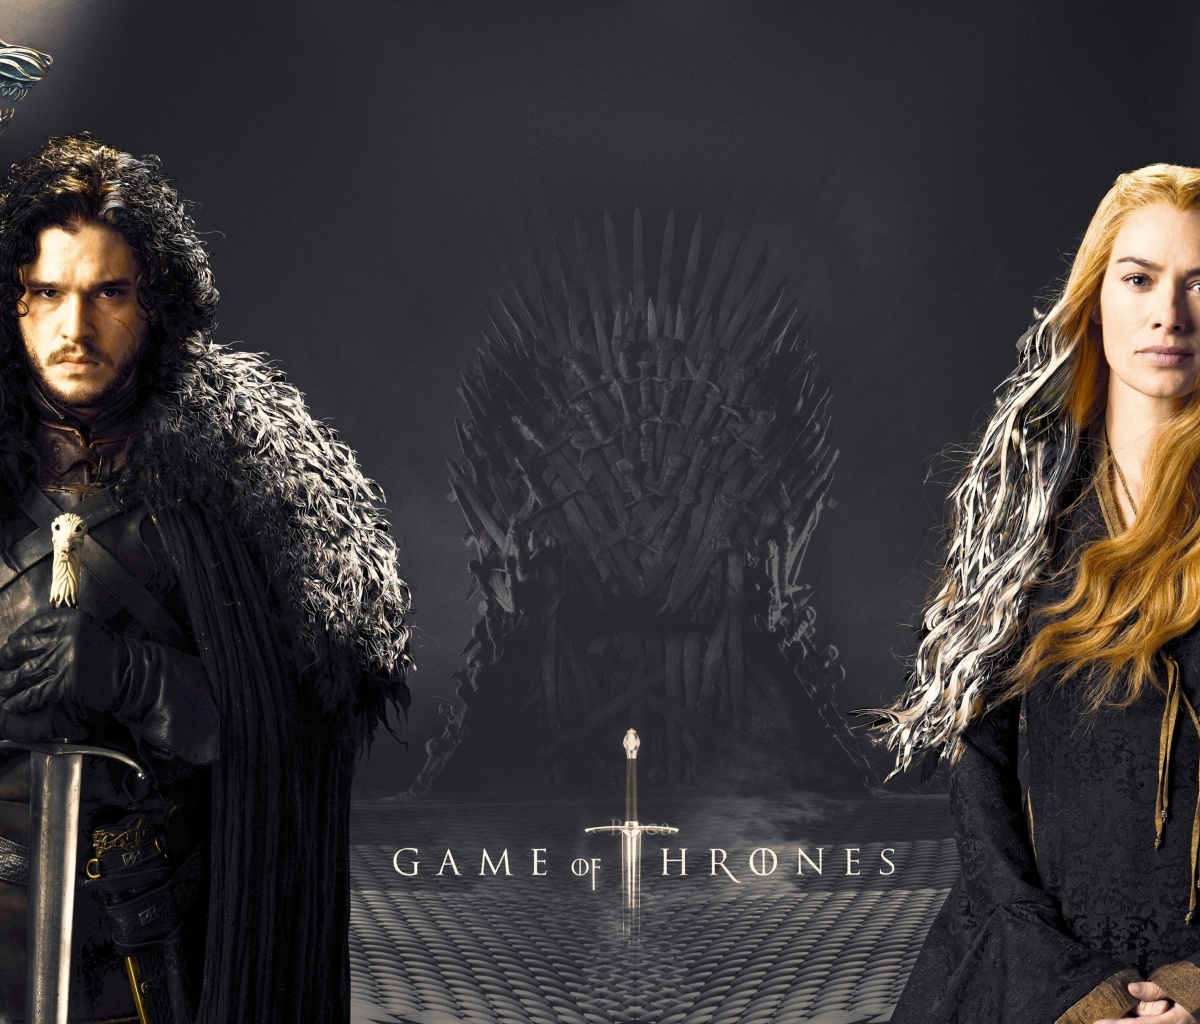 Game Of Thrones actors Jon Snow and Cersei Lannister wallpaper 1200x1024